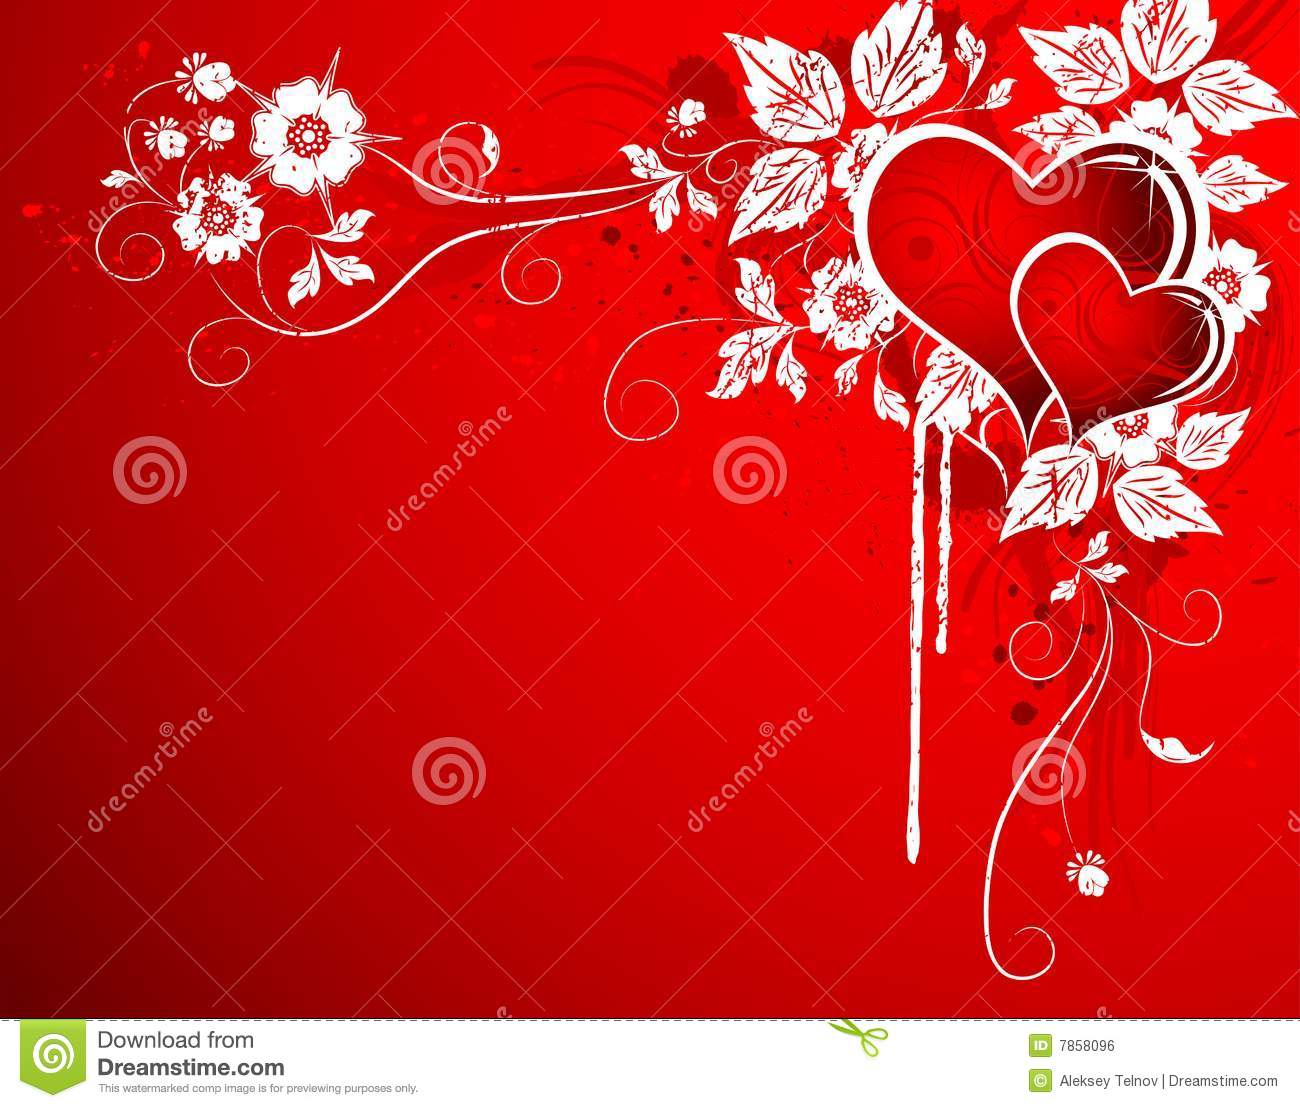 Valentines Day Royalty Free Stock Image  Image 7858096